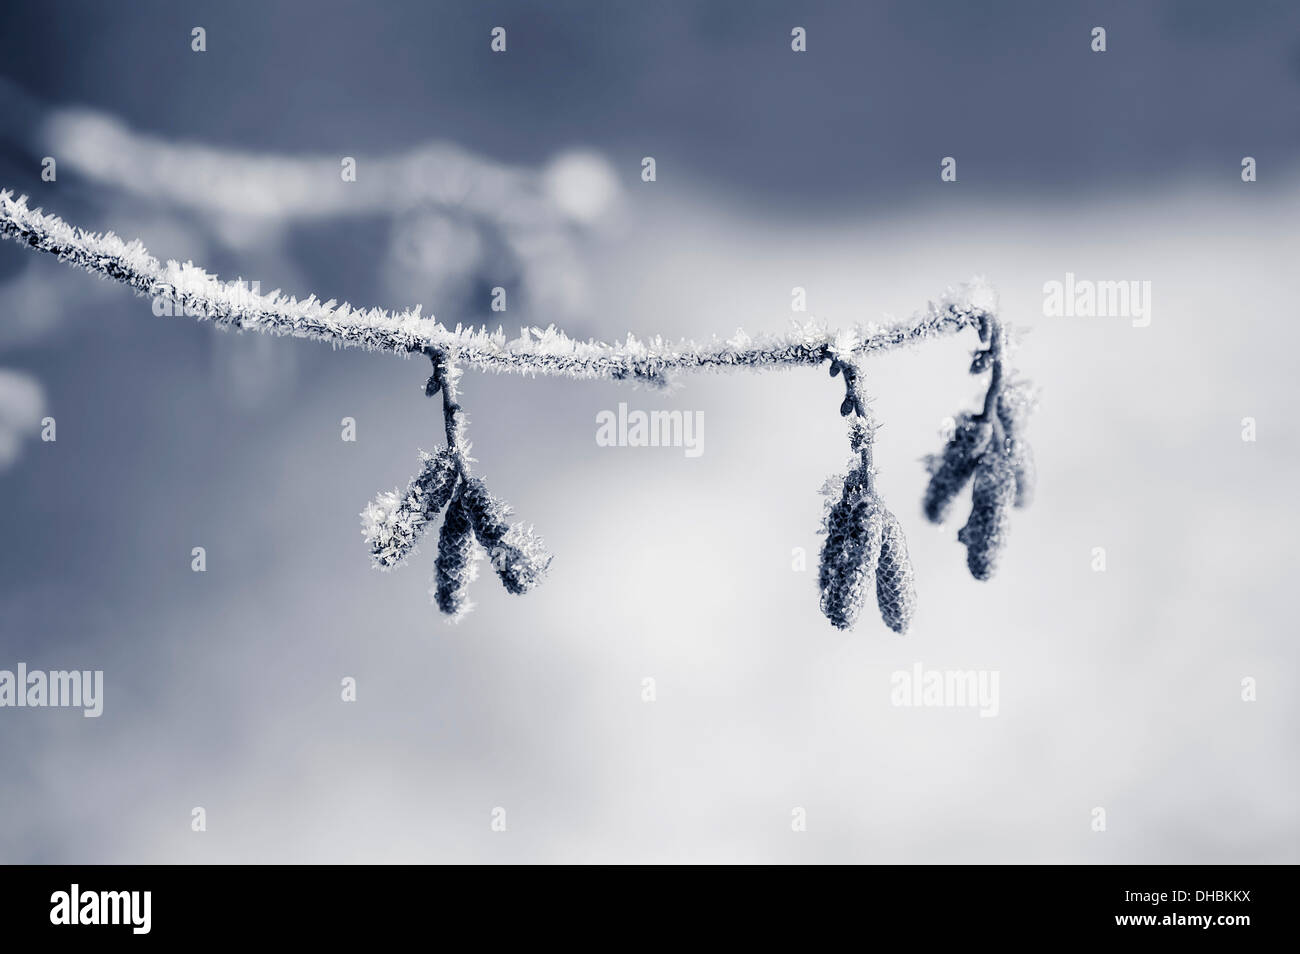 Catkins of Hazel, Corylus avellana, covered in hoary frost, on a twig against a soft focus snowy background. Stock Photo